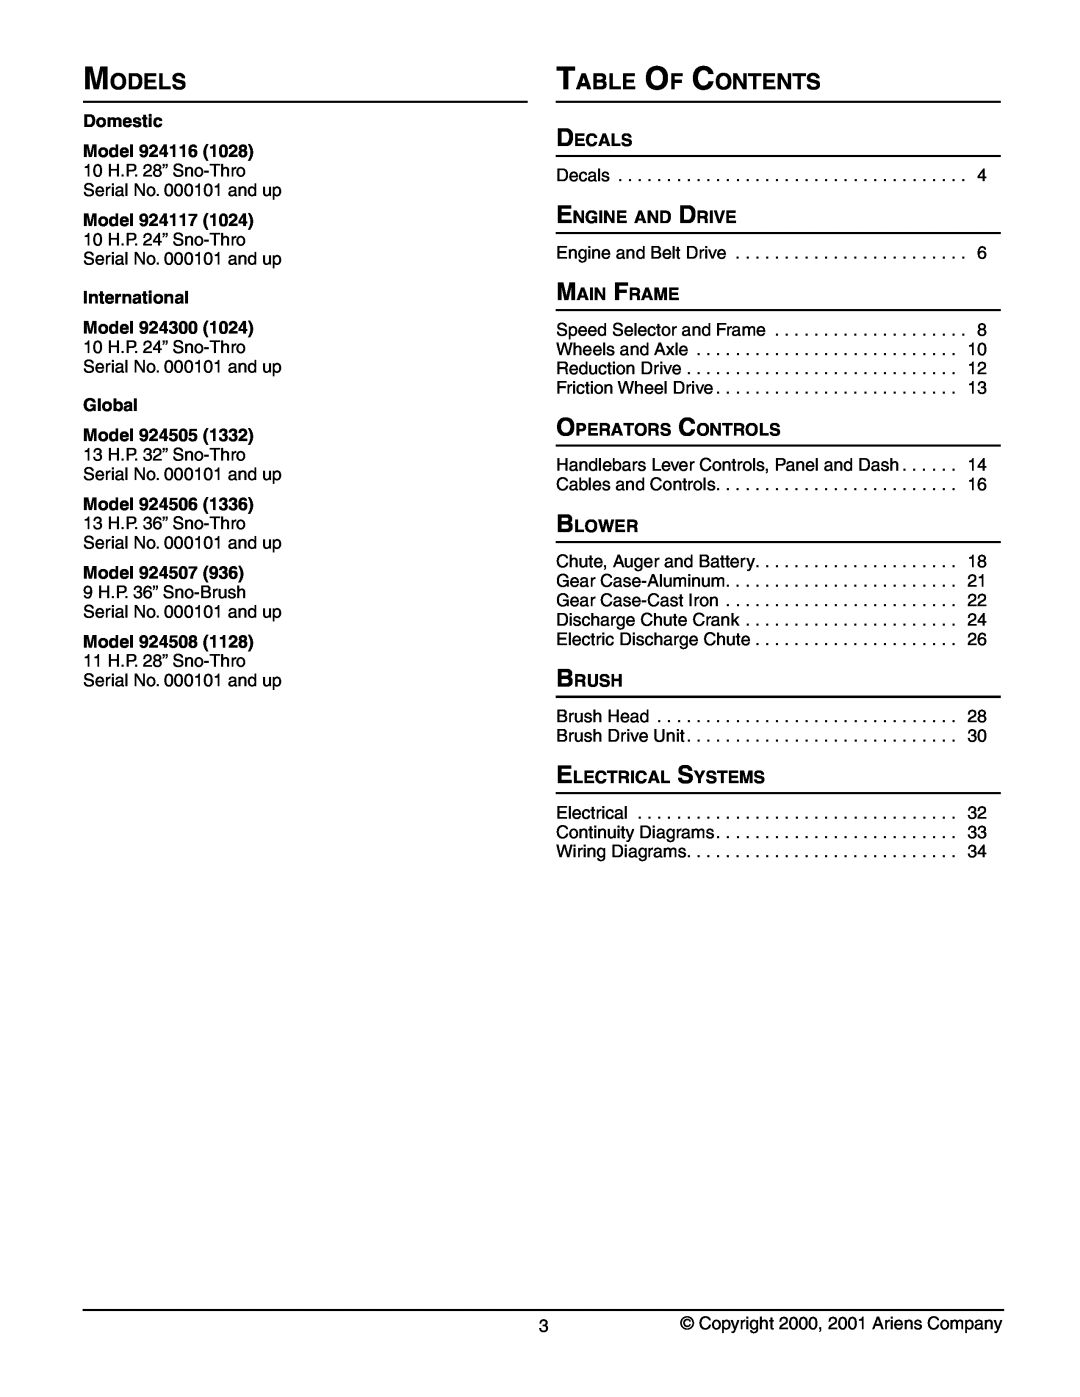 Ariens 924507 - 936, 924117 - 1024, 924116 - 1028, 924300 - 1024 manual Models, Table Of Contents 